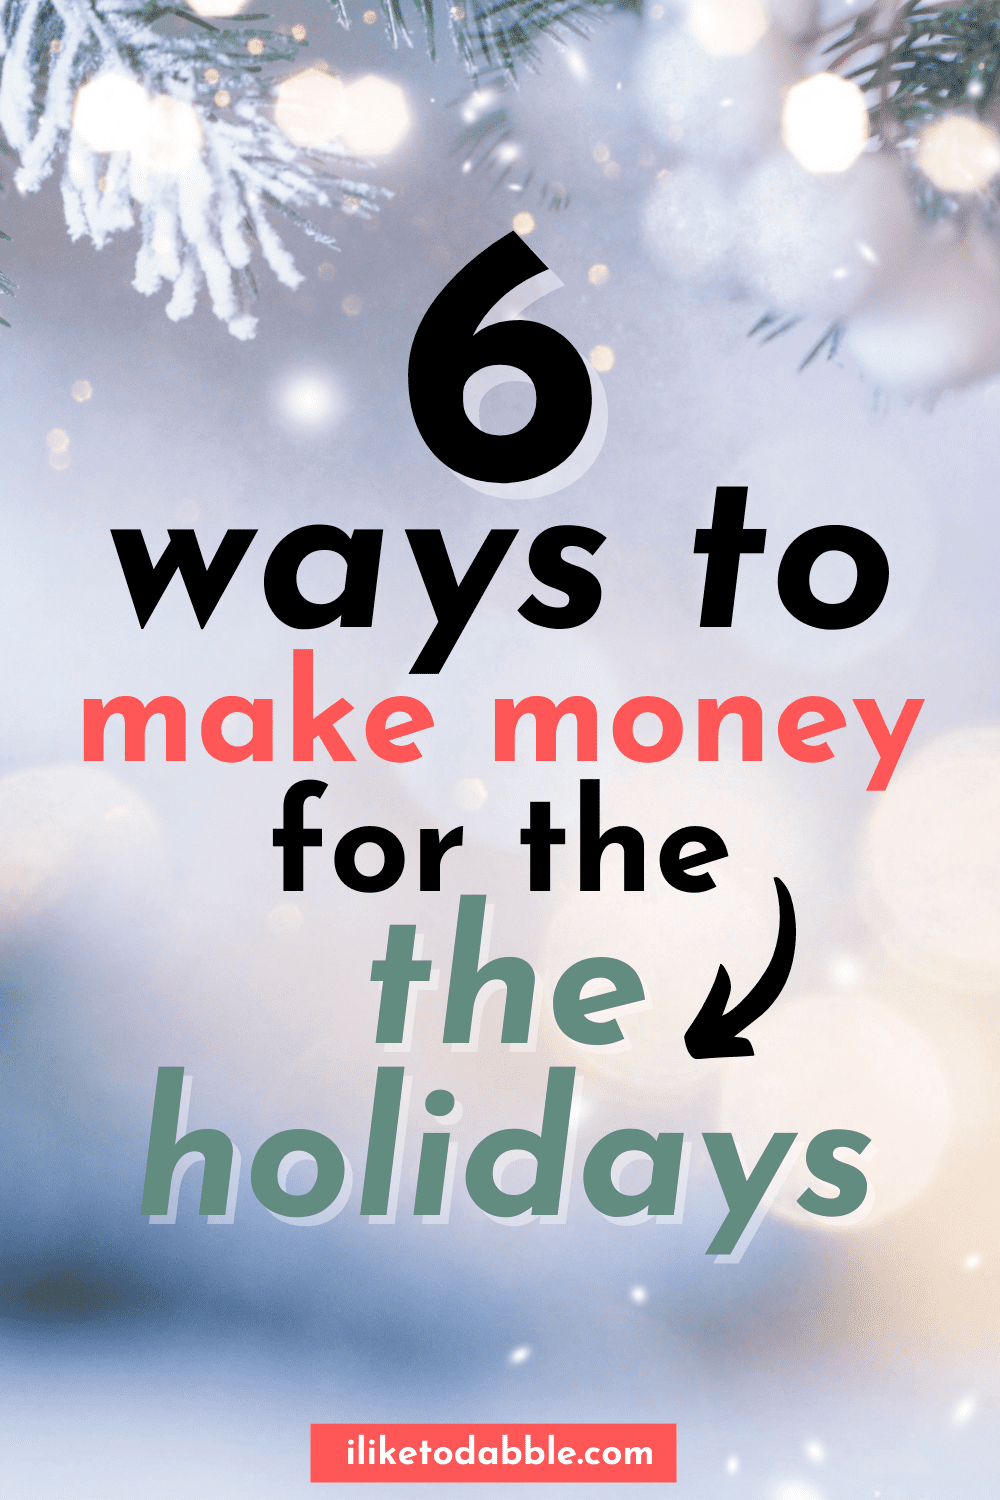 Text reads: 6 ways to make money for the holidays; text is against a background of lights and snowflakes